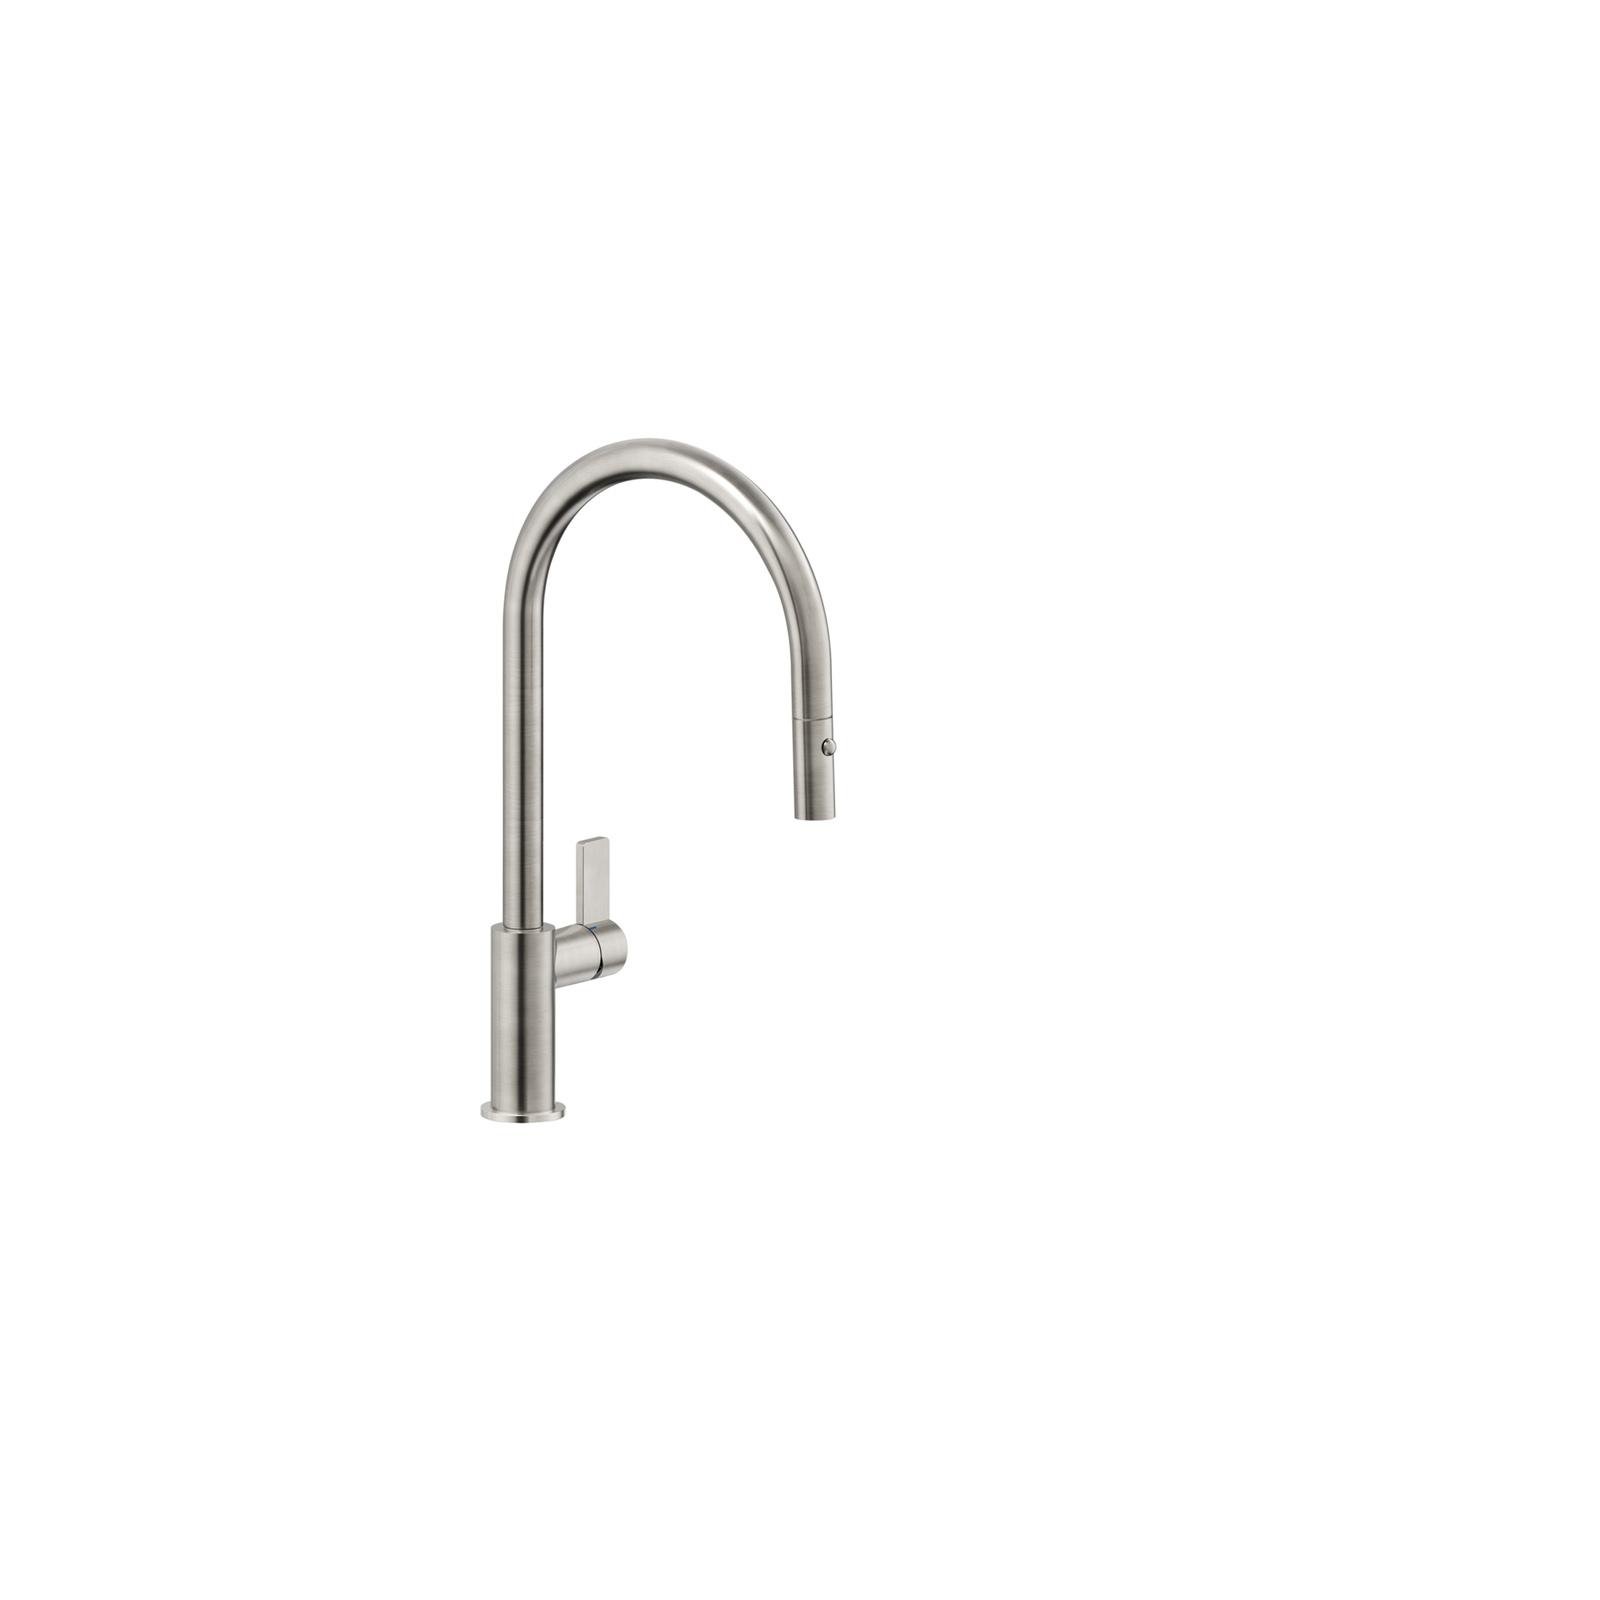 High-quality mixer tap Queen - rc96137do065